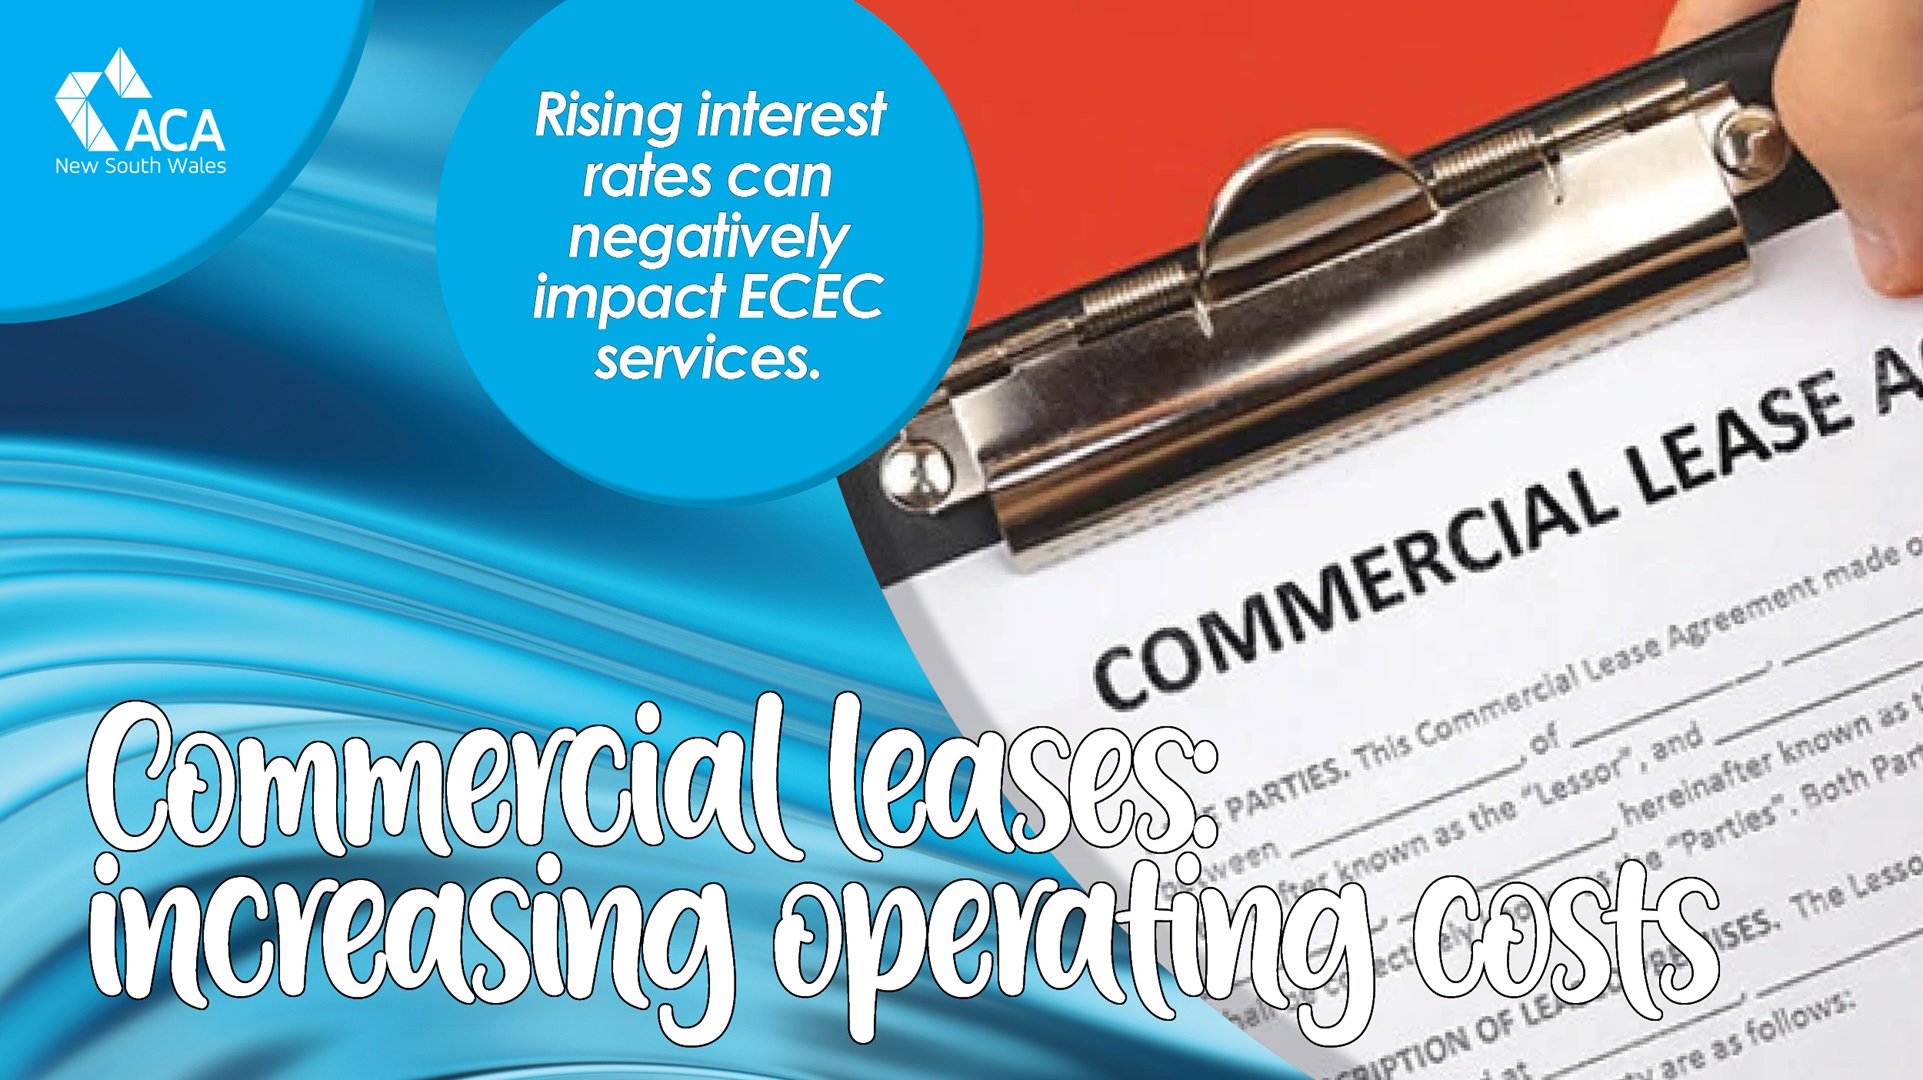 Commercial Leases: Increasing Operating Costs